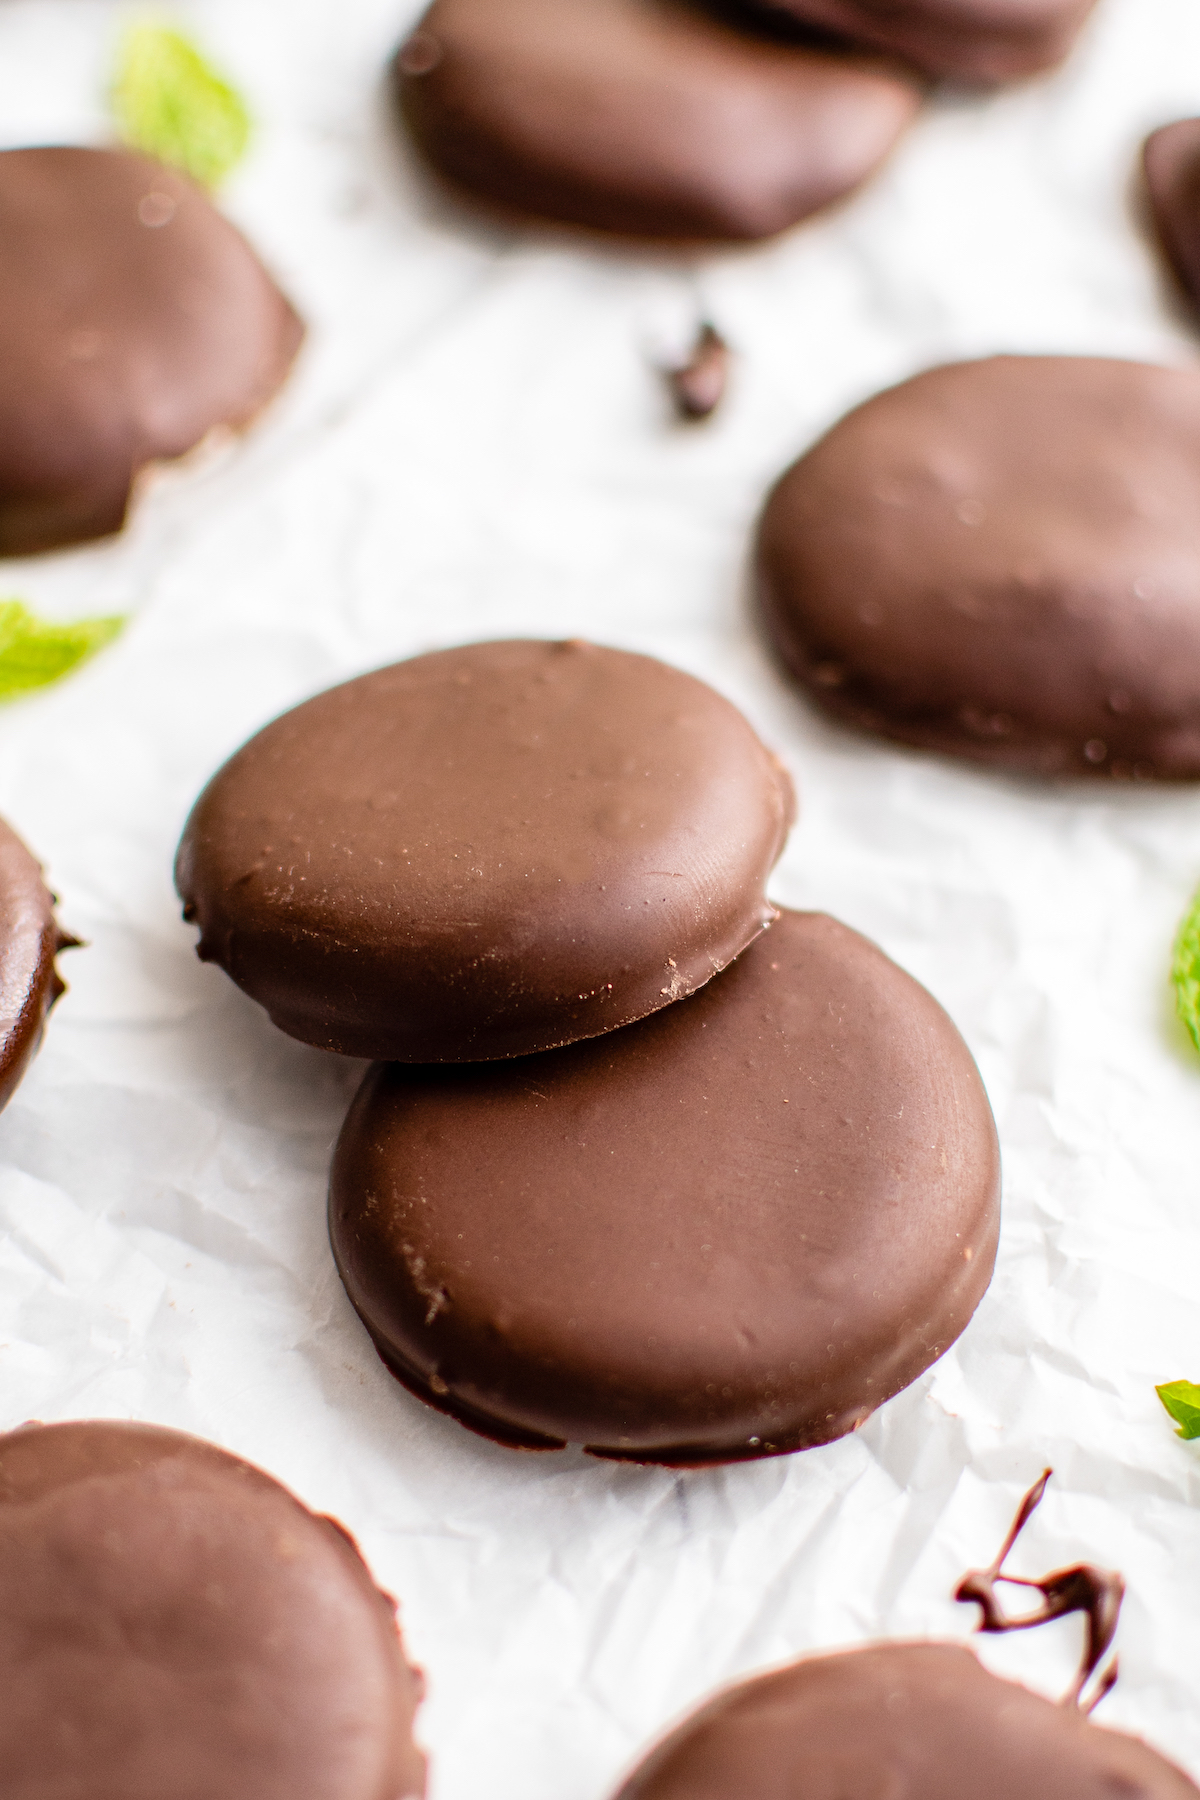 Homemade peppermint patties garnished with mint leaves.